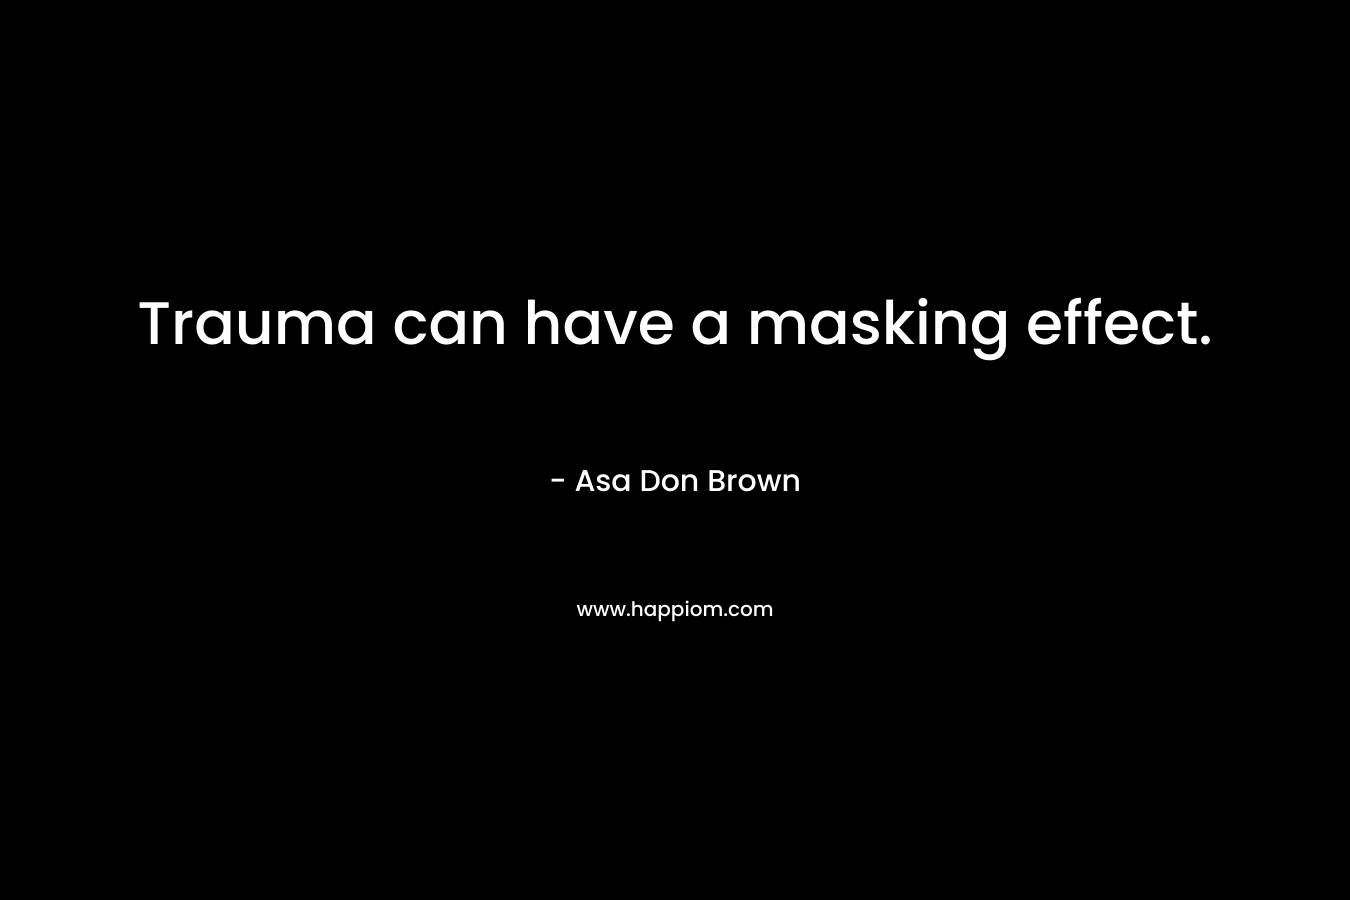 Trauma can have a masking effect. – Asa Don Brown